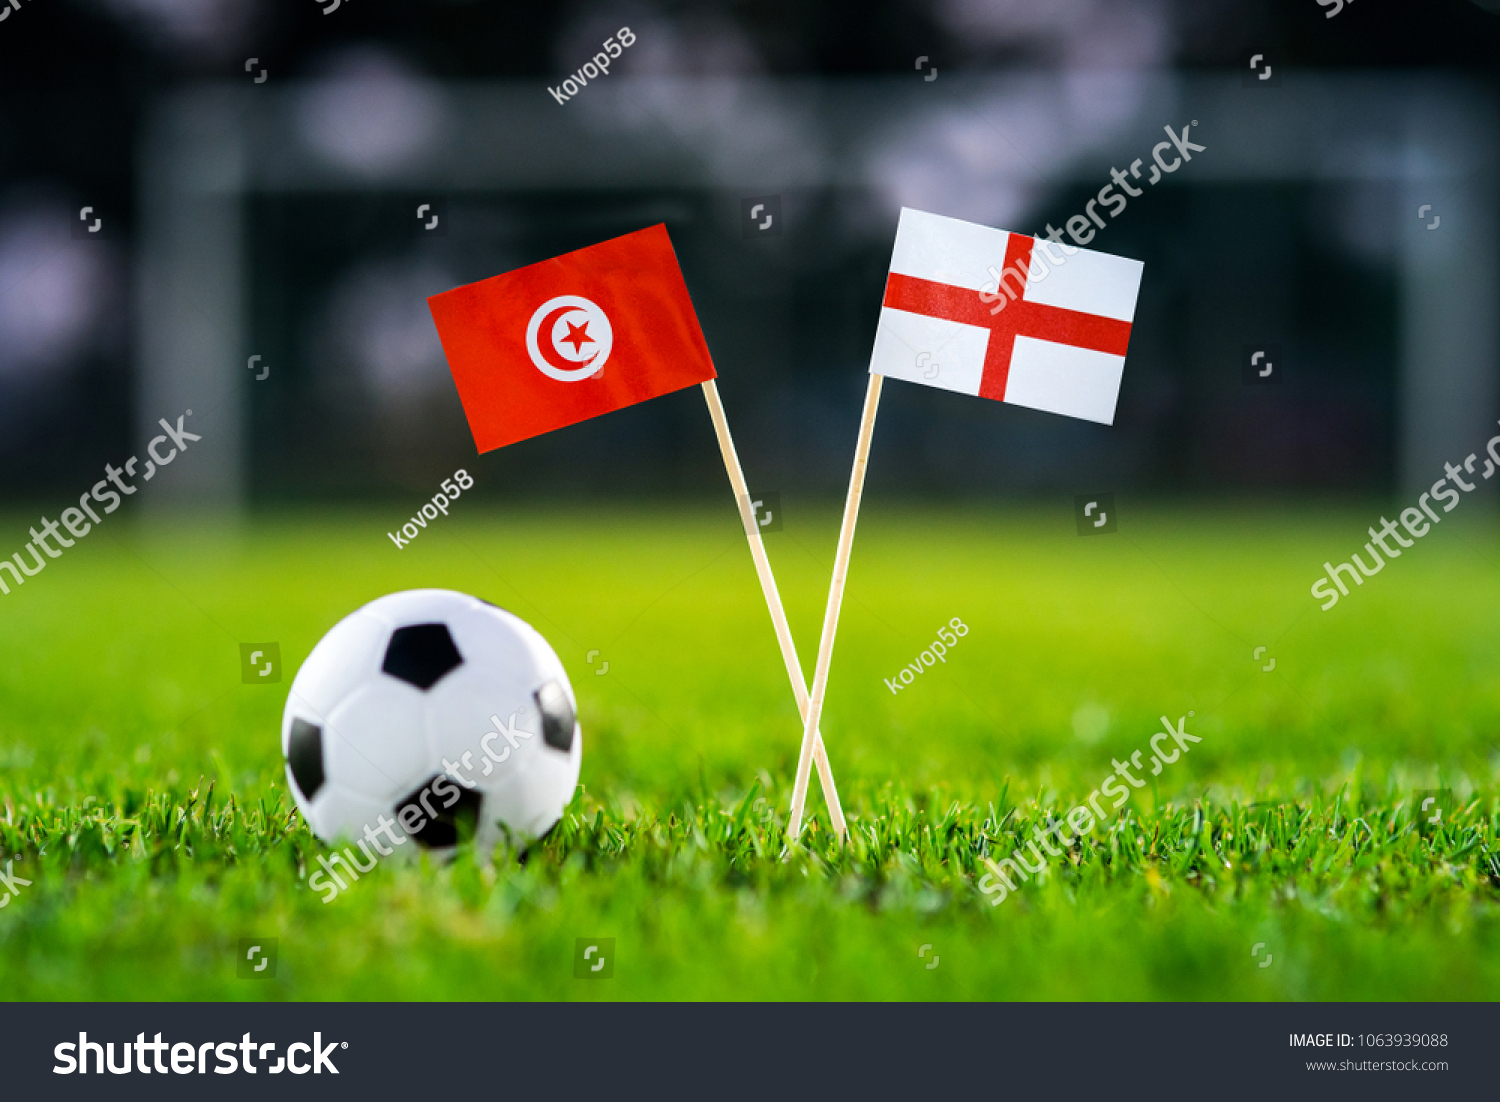 Tunisia - England, Group G, Monday, 18. June, Football, National Flags on green grass, white football ball on ground. #1063939088